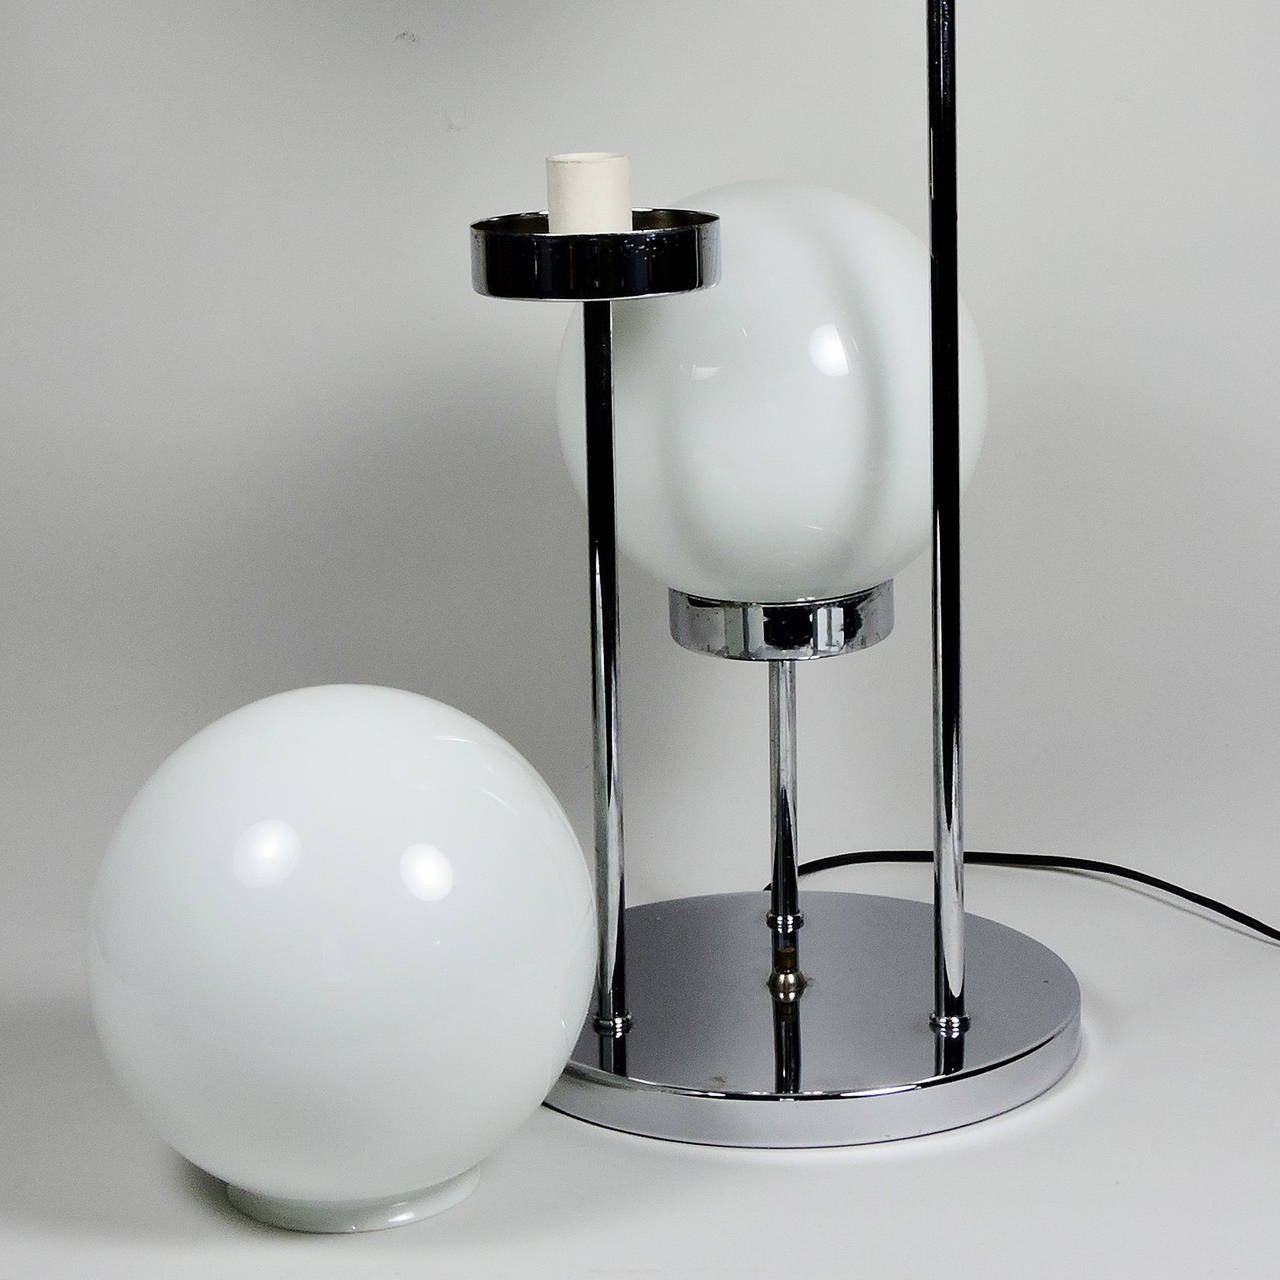 Mid-Century Modern Italian three-globe table lamp, possibly by Reggiani. Measures: Height 29 inches, base 10 1/4 inches, globe diameter 7 inches.